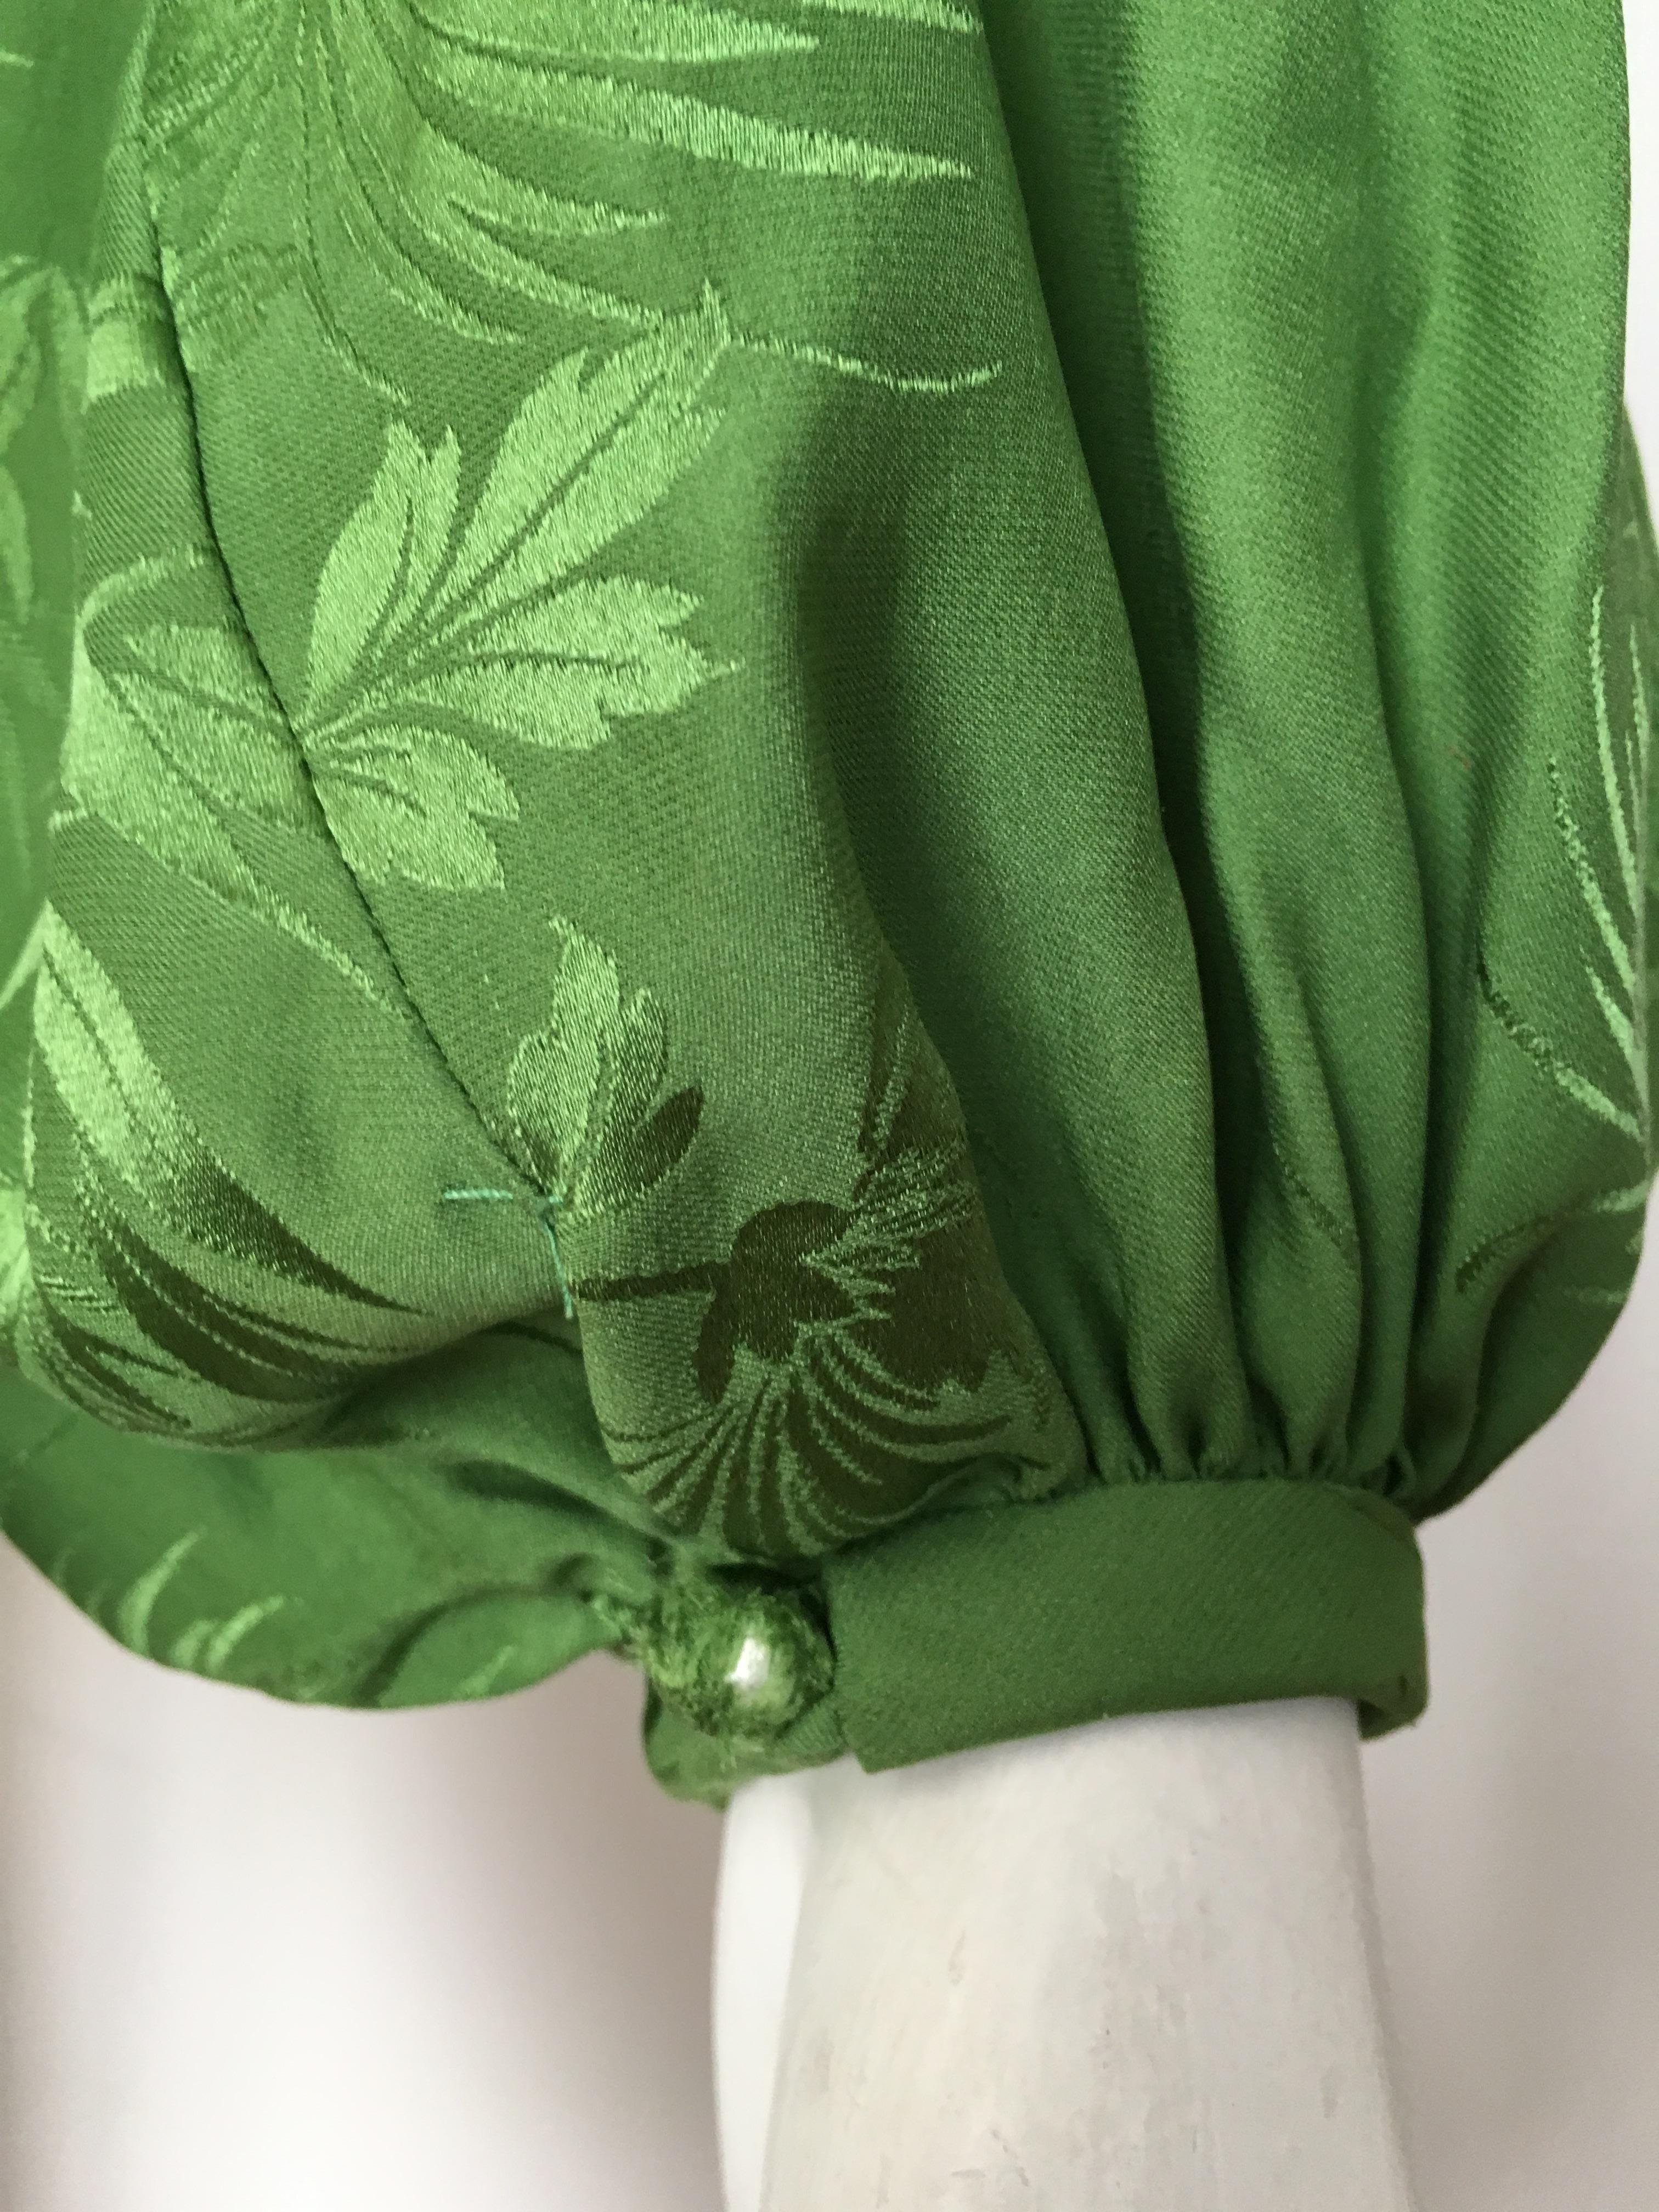 Women's or Men's Malcolm Starr 1970s Green Silk Long Sleeve Blouse Size 6/8. For Sale